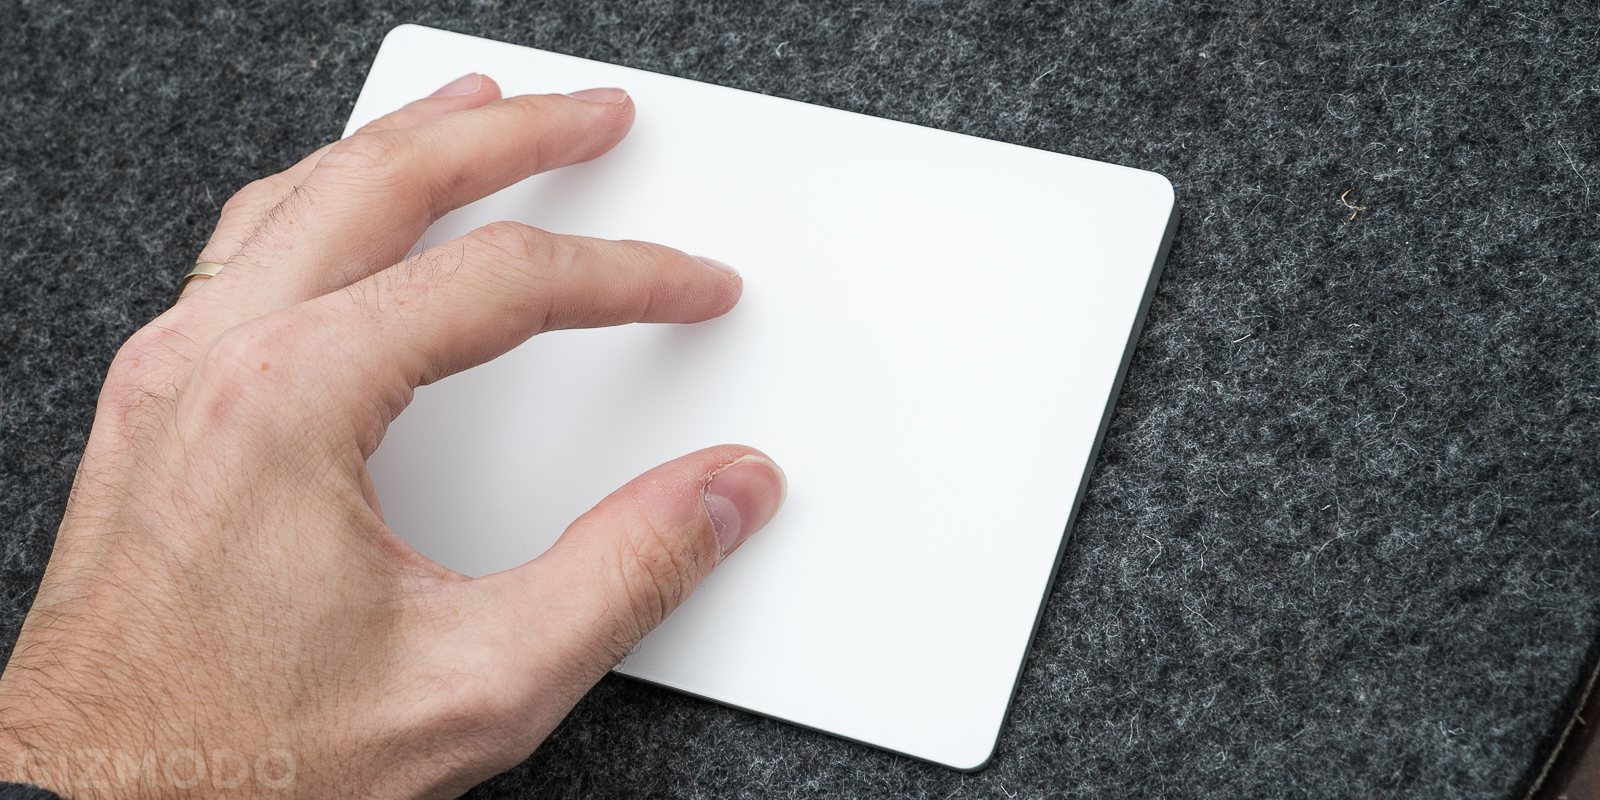 Apple’s New Trackpad Is Magical, But Can’t Kill My Mouse